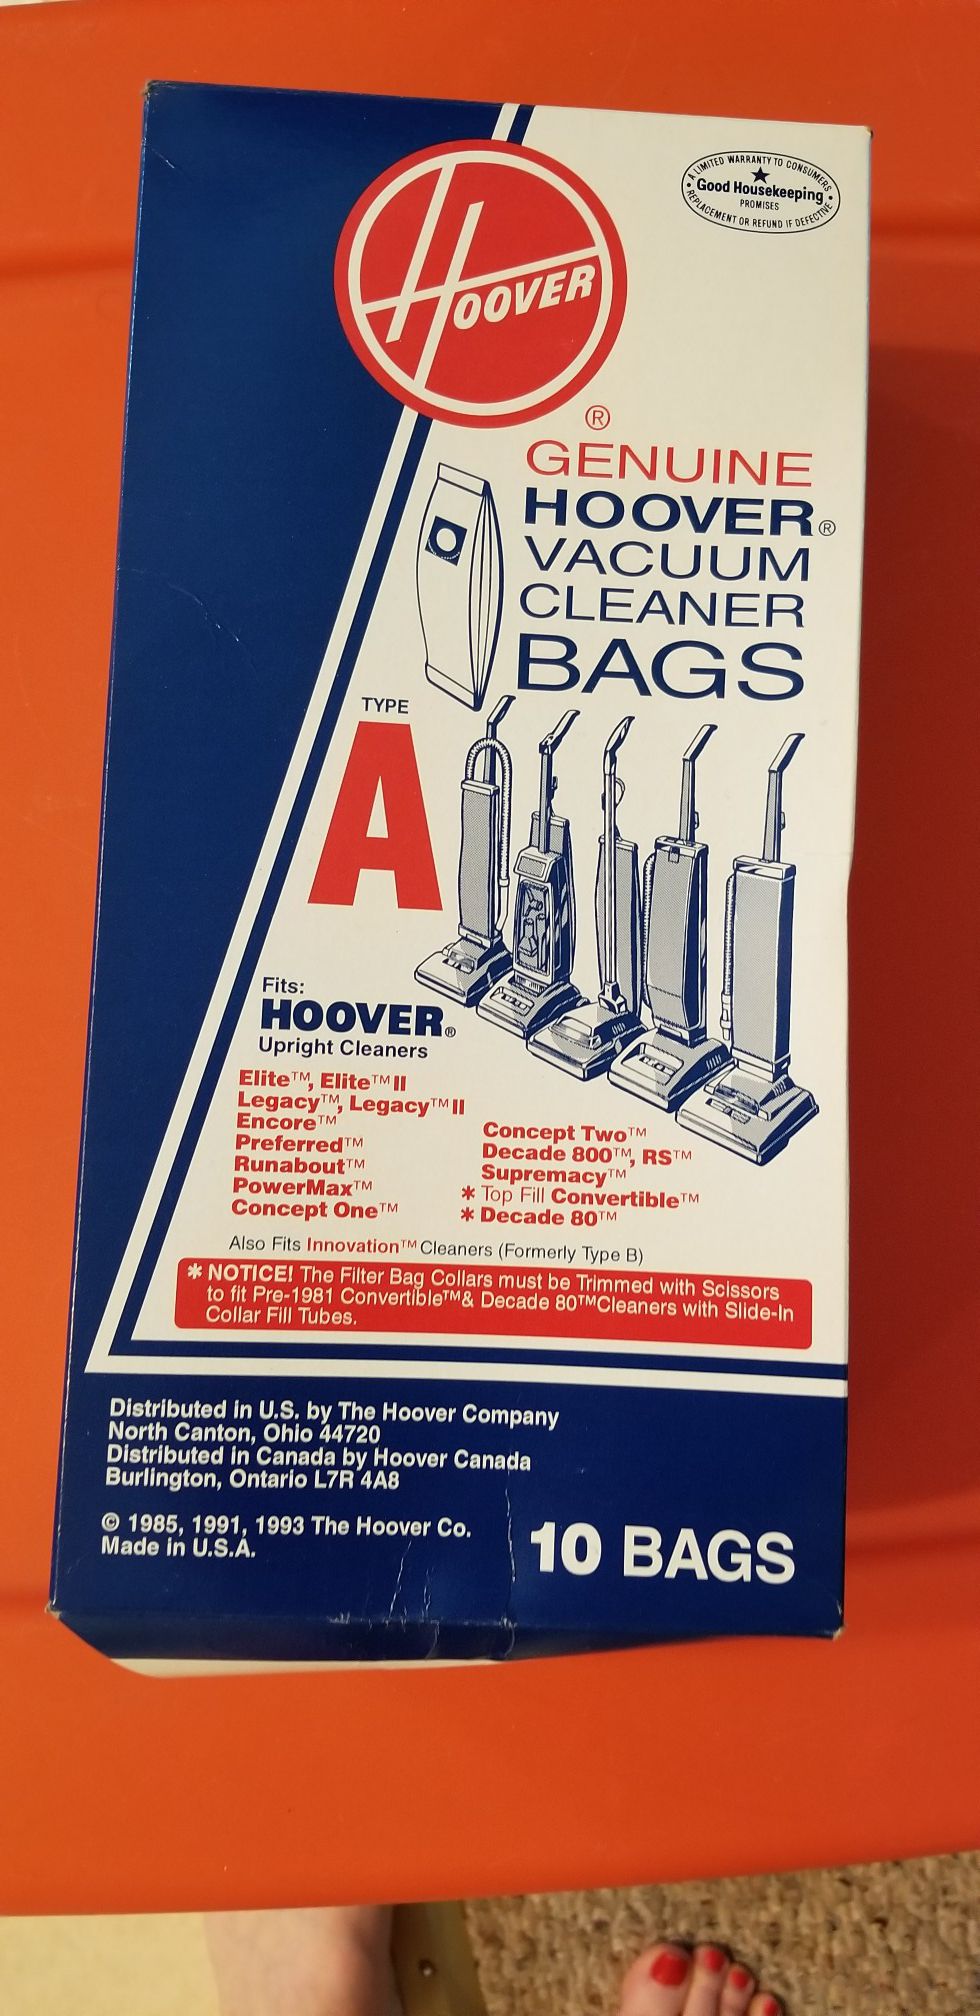 Hoover vacuum cleaner bags, type A